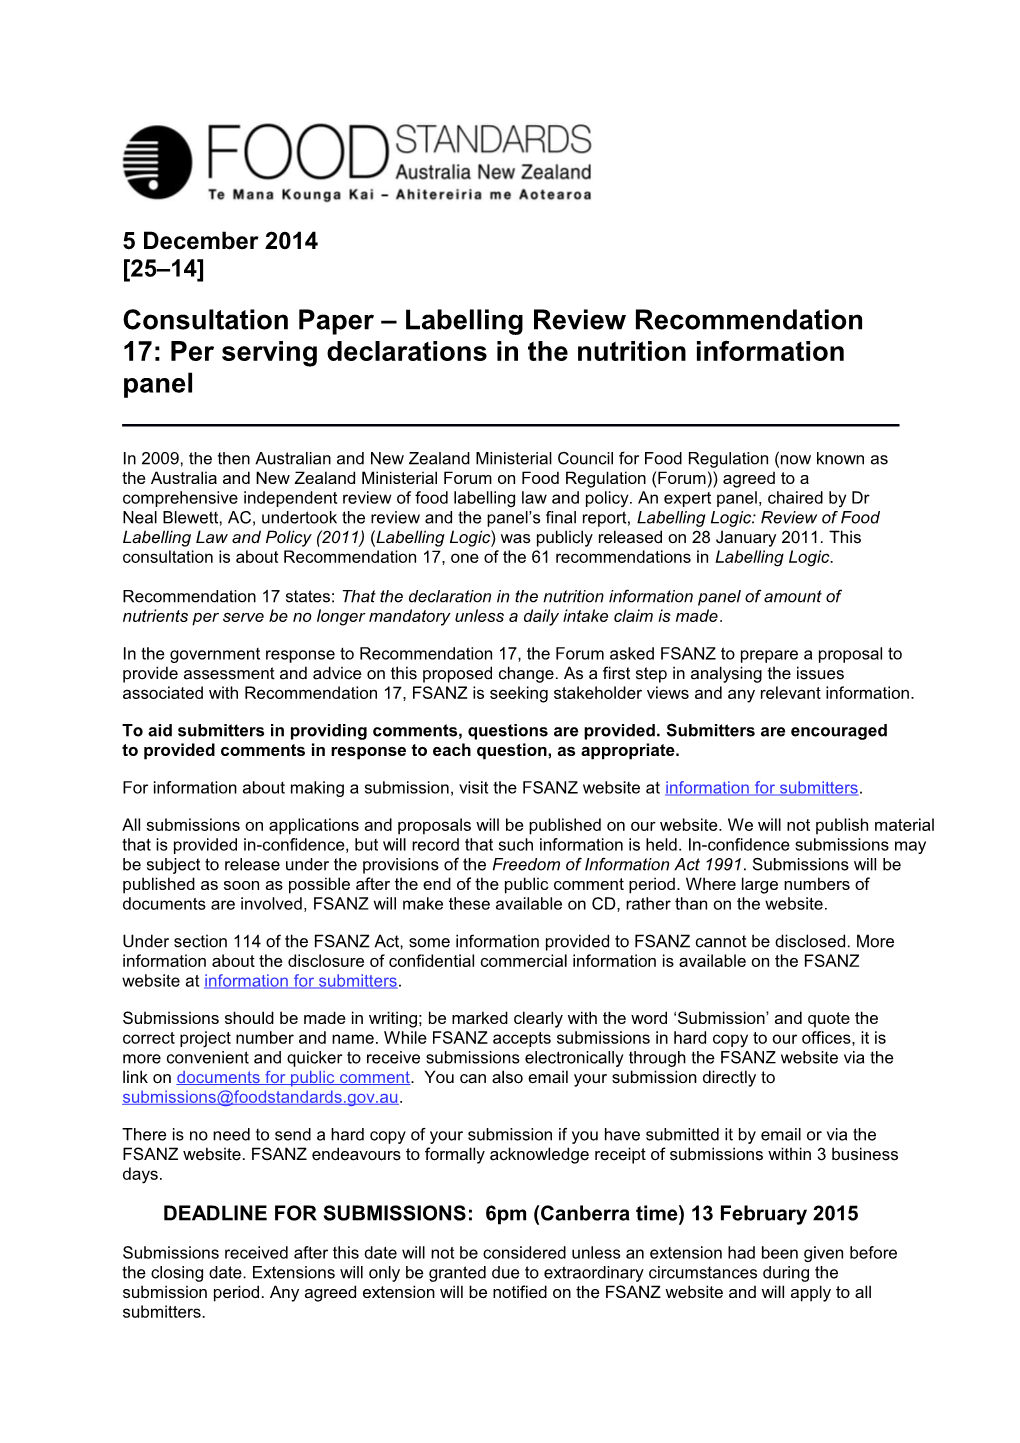 Consultation Paper Labelling Review Recommendation 17: Per Serving Declarations in The